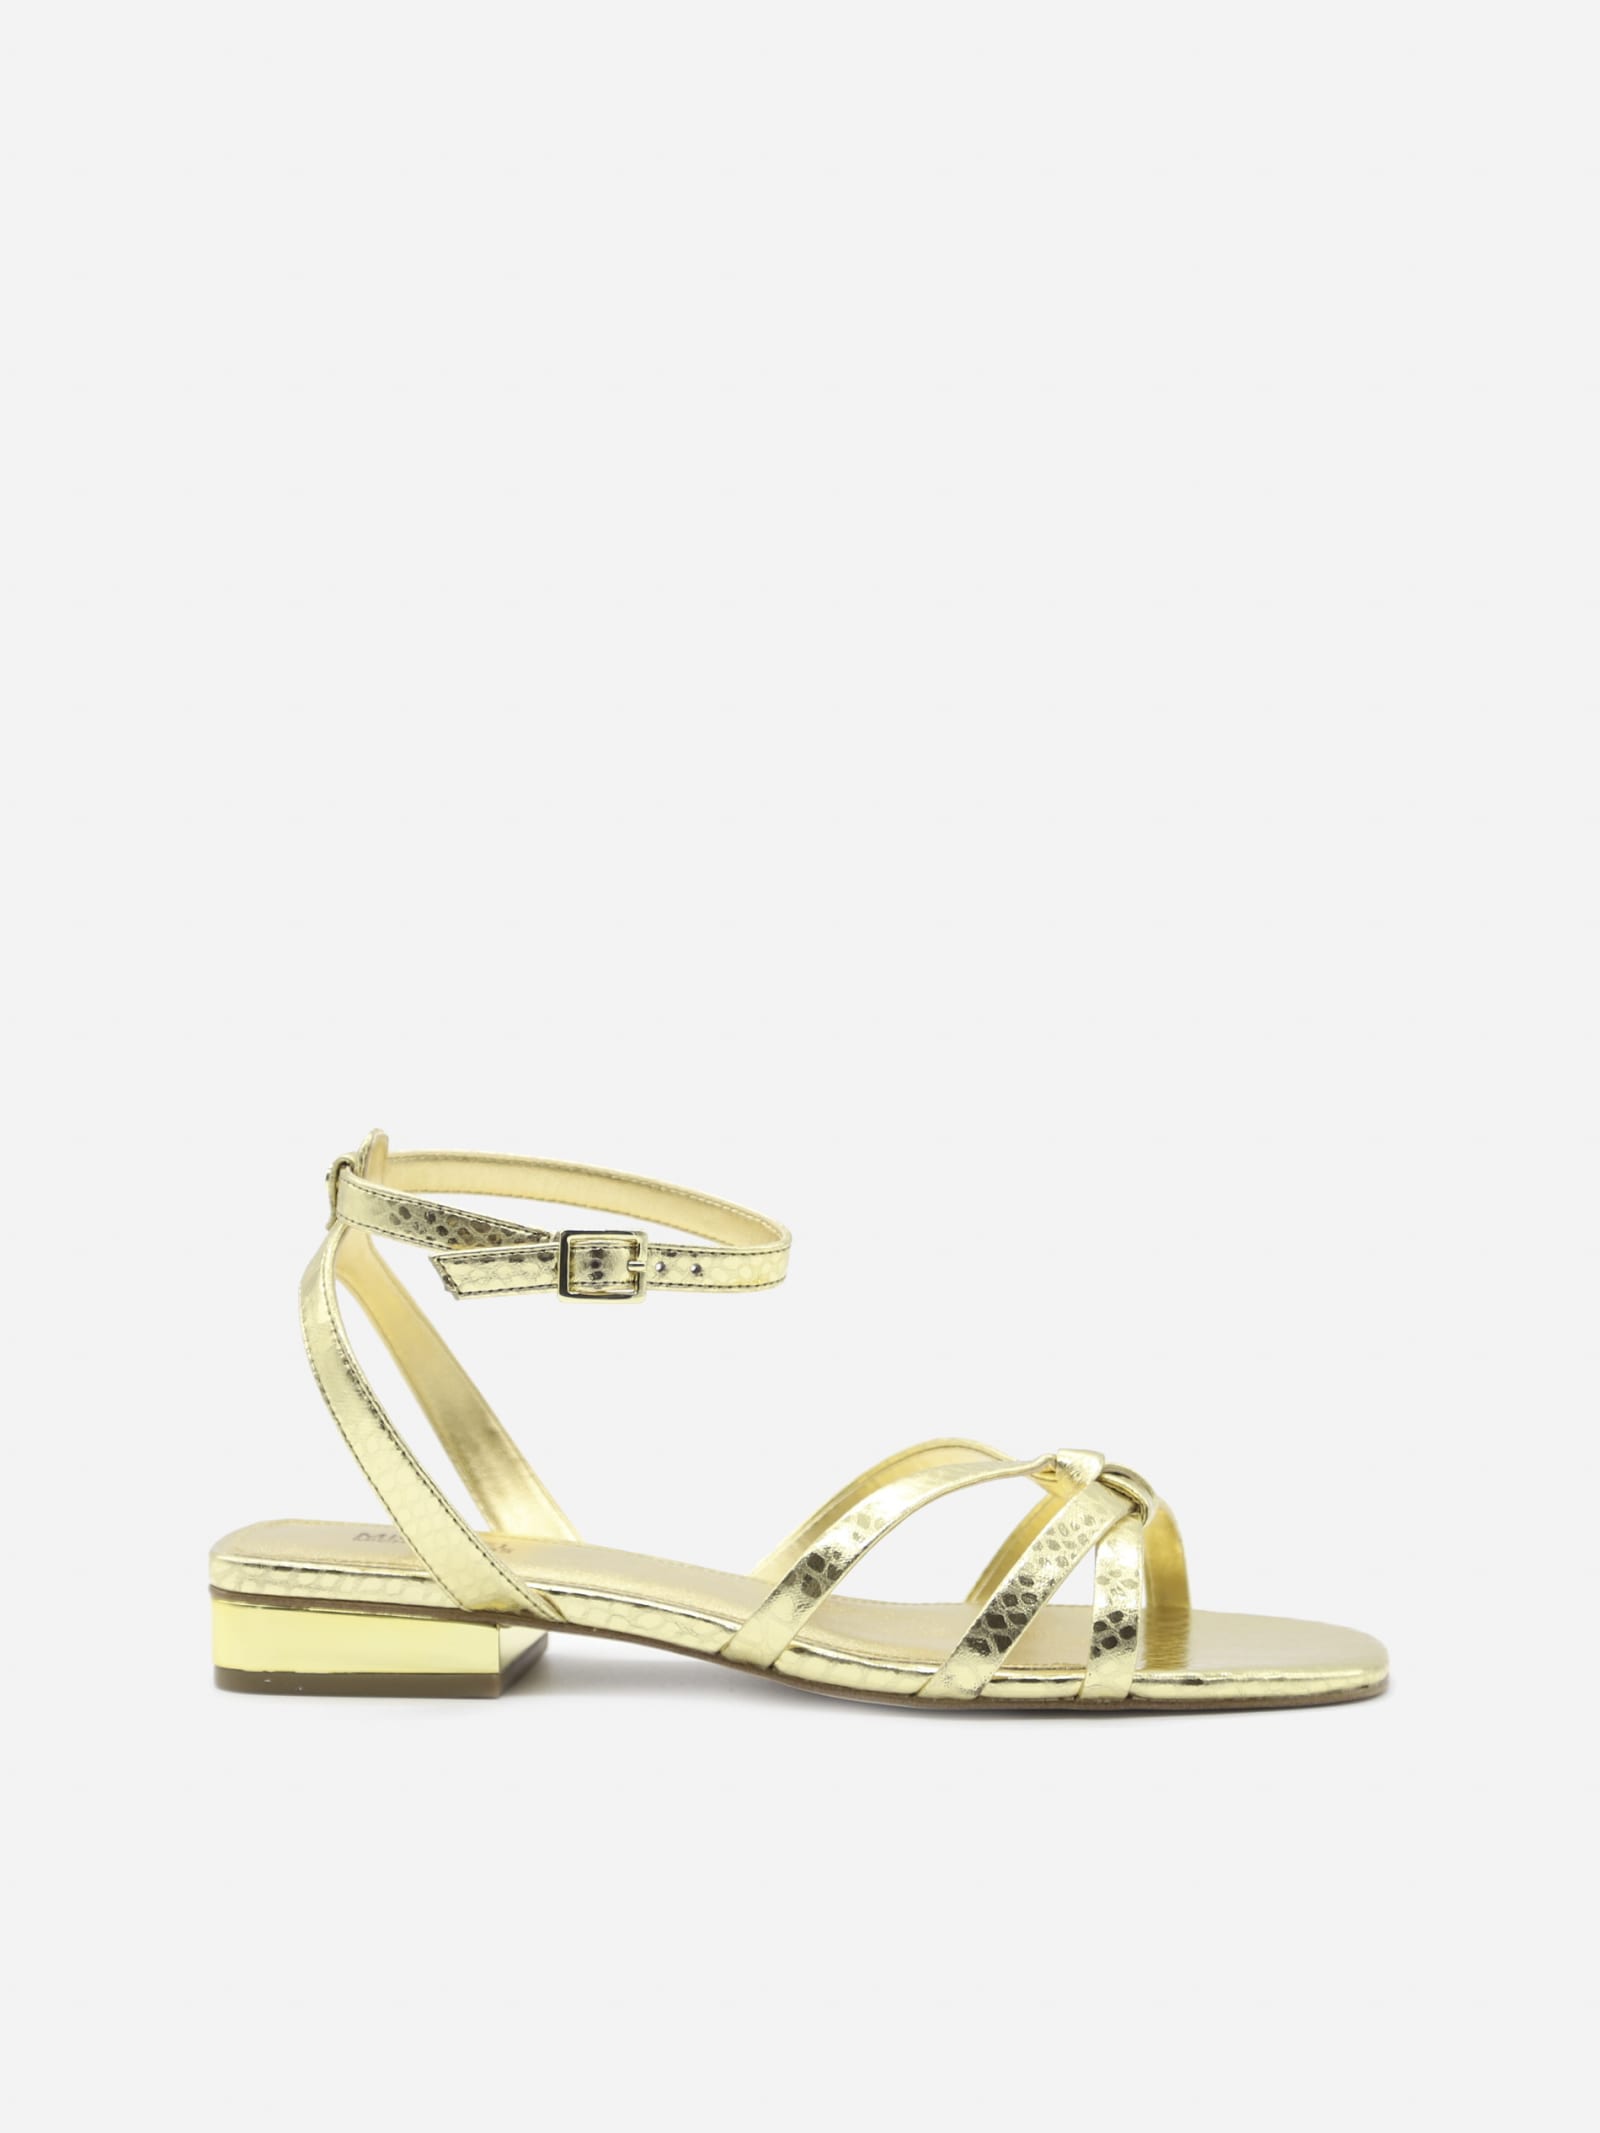 Buy MICHAEL Michael Kors Brinkley Sandals In Python Effect Metallic Leather online, shop MICHAEL Michael Kors shoes with free shipping